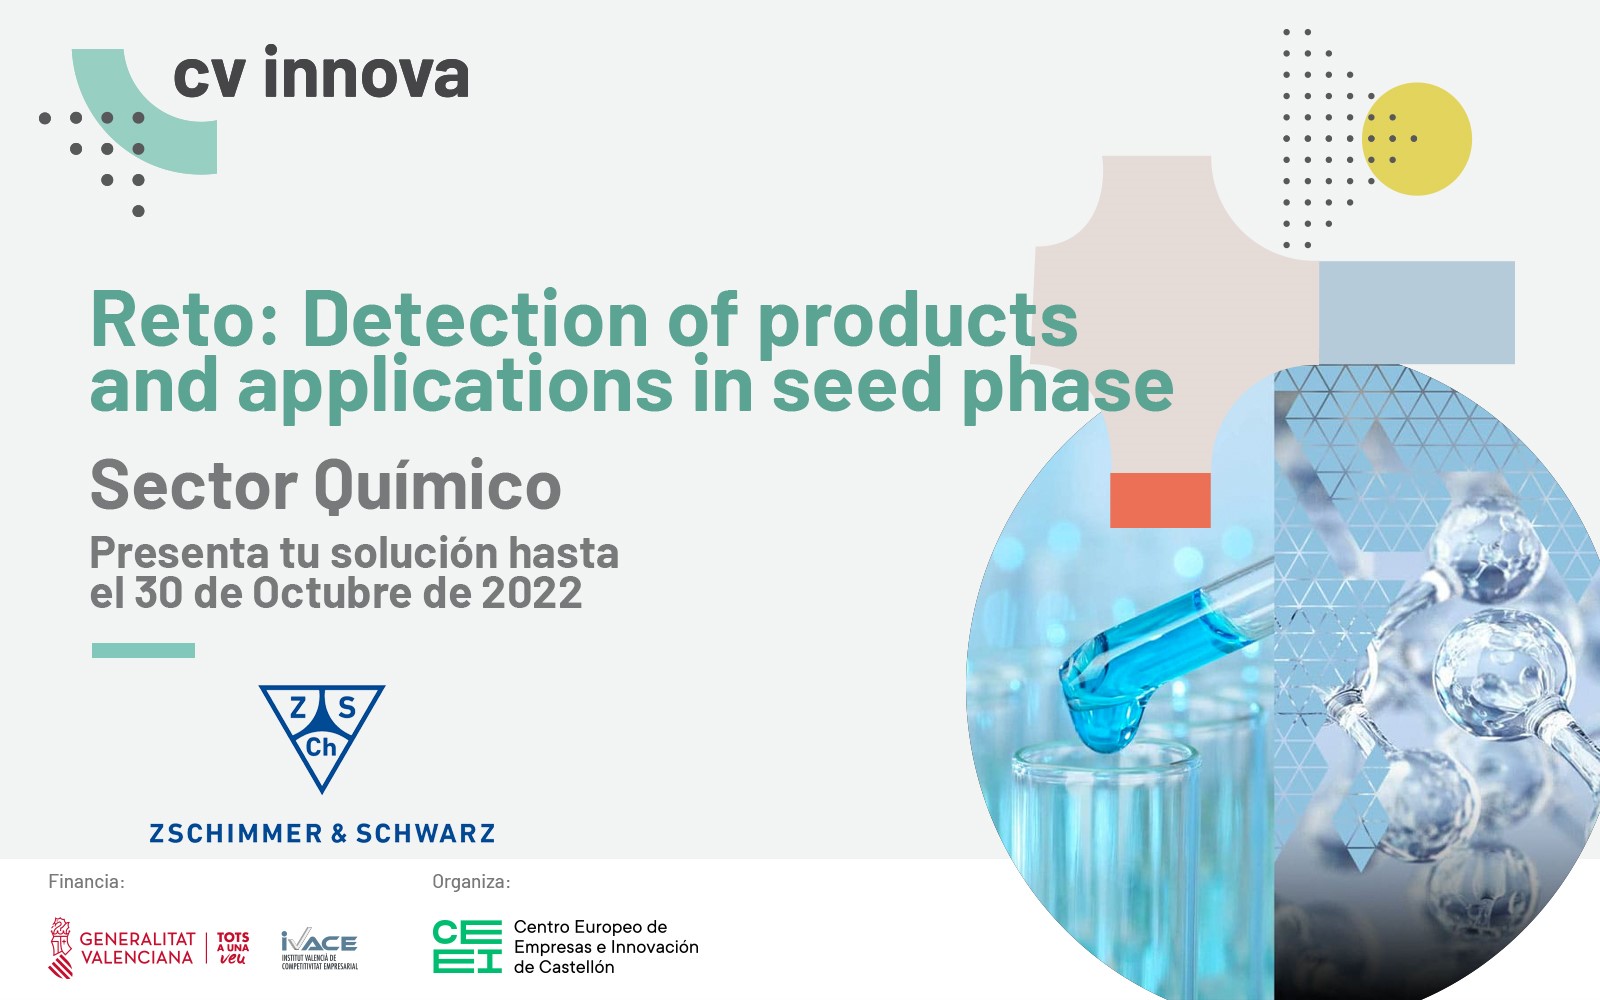 Reto: Detection of products and applications in seed phase